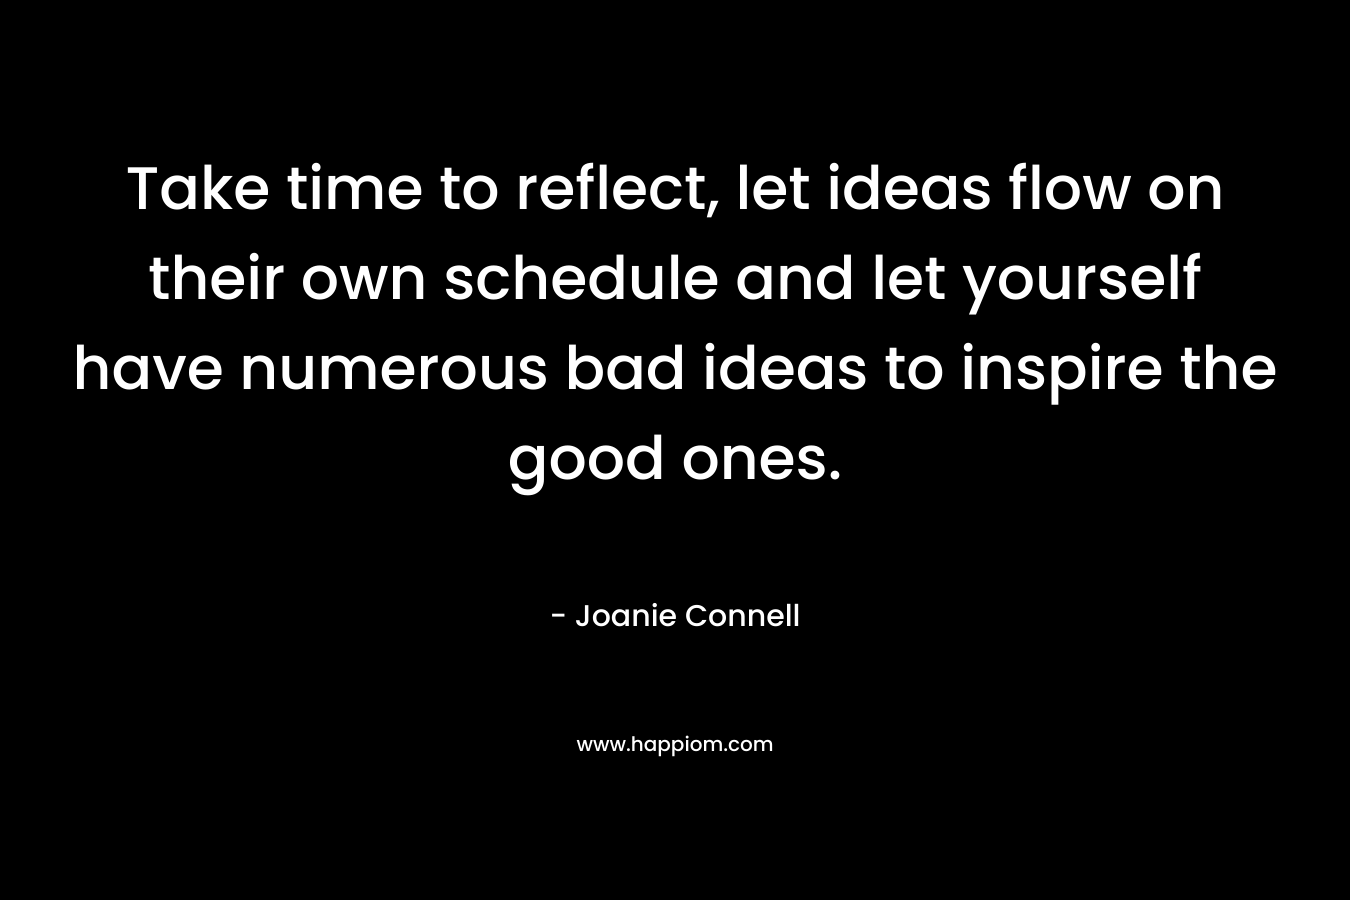 Take time to reflect, let ideas flow on their own schedule and let yourself have numerous bad ideas to inspire the good ones.